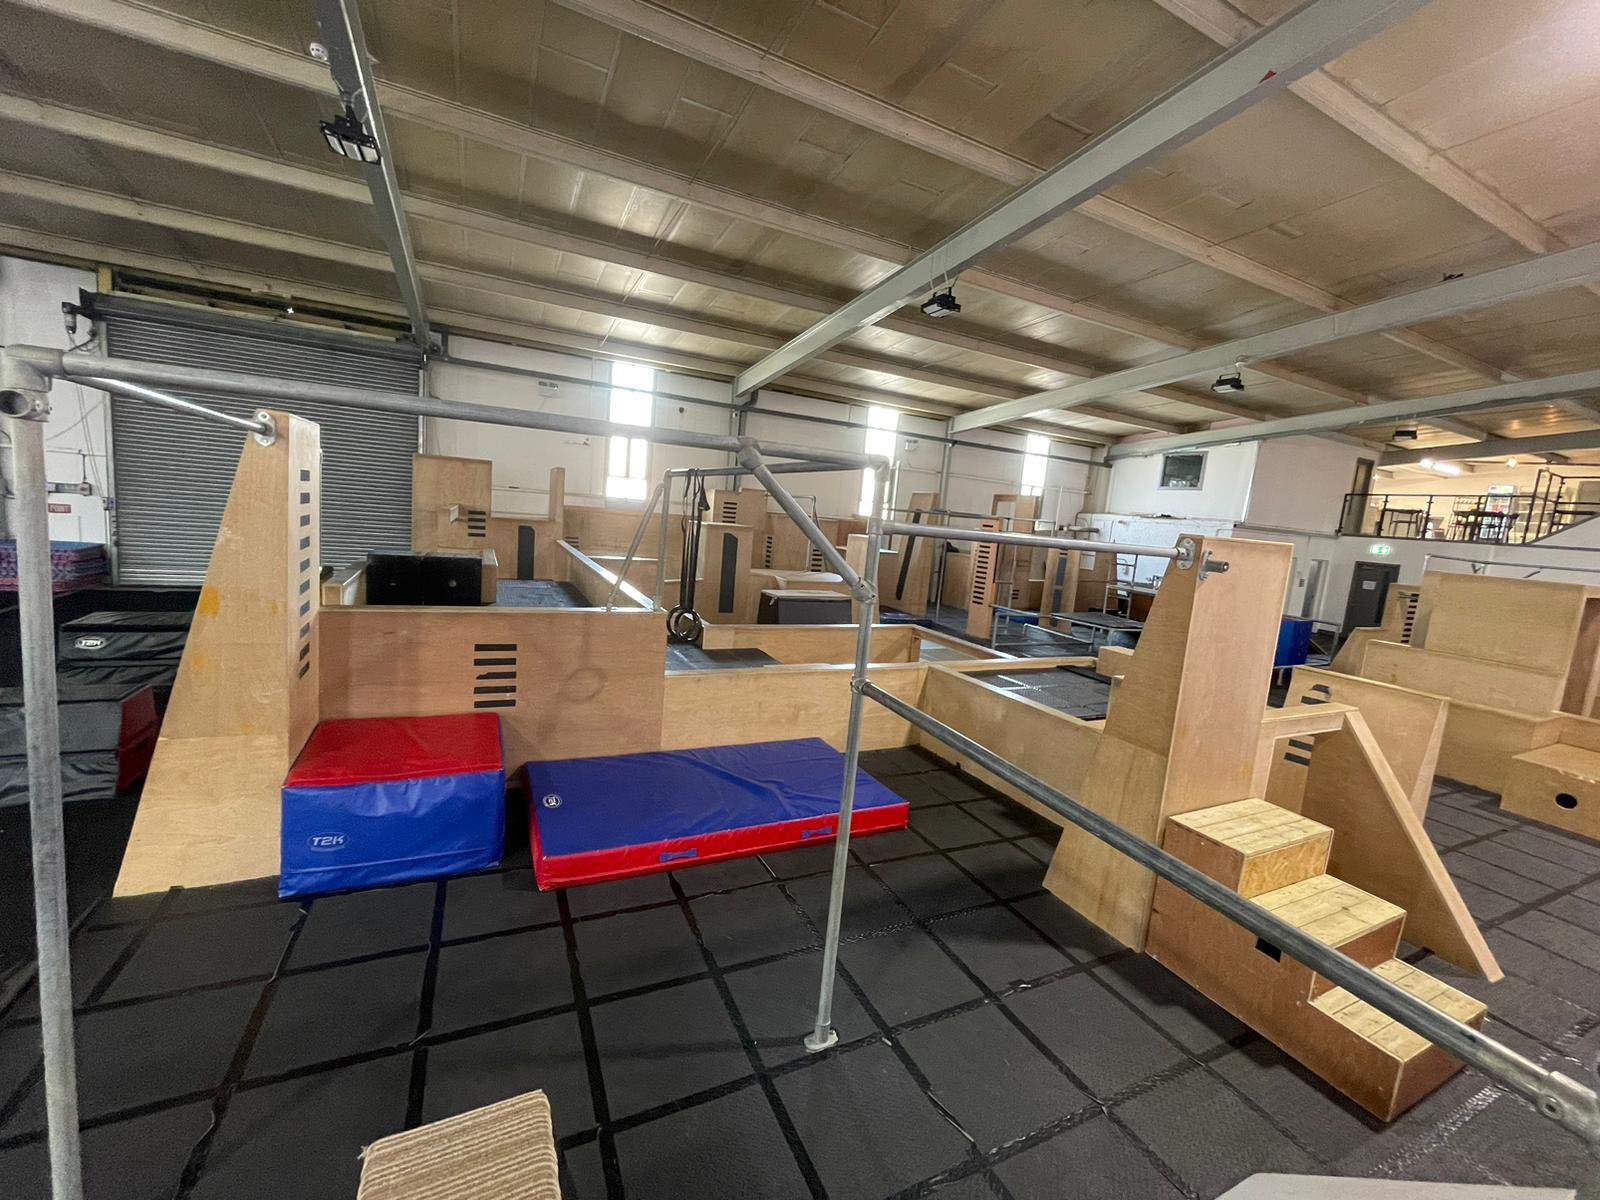 Gym with parkour equipment